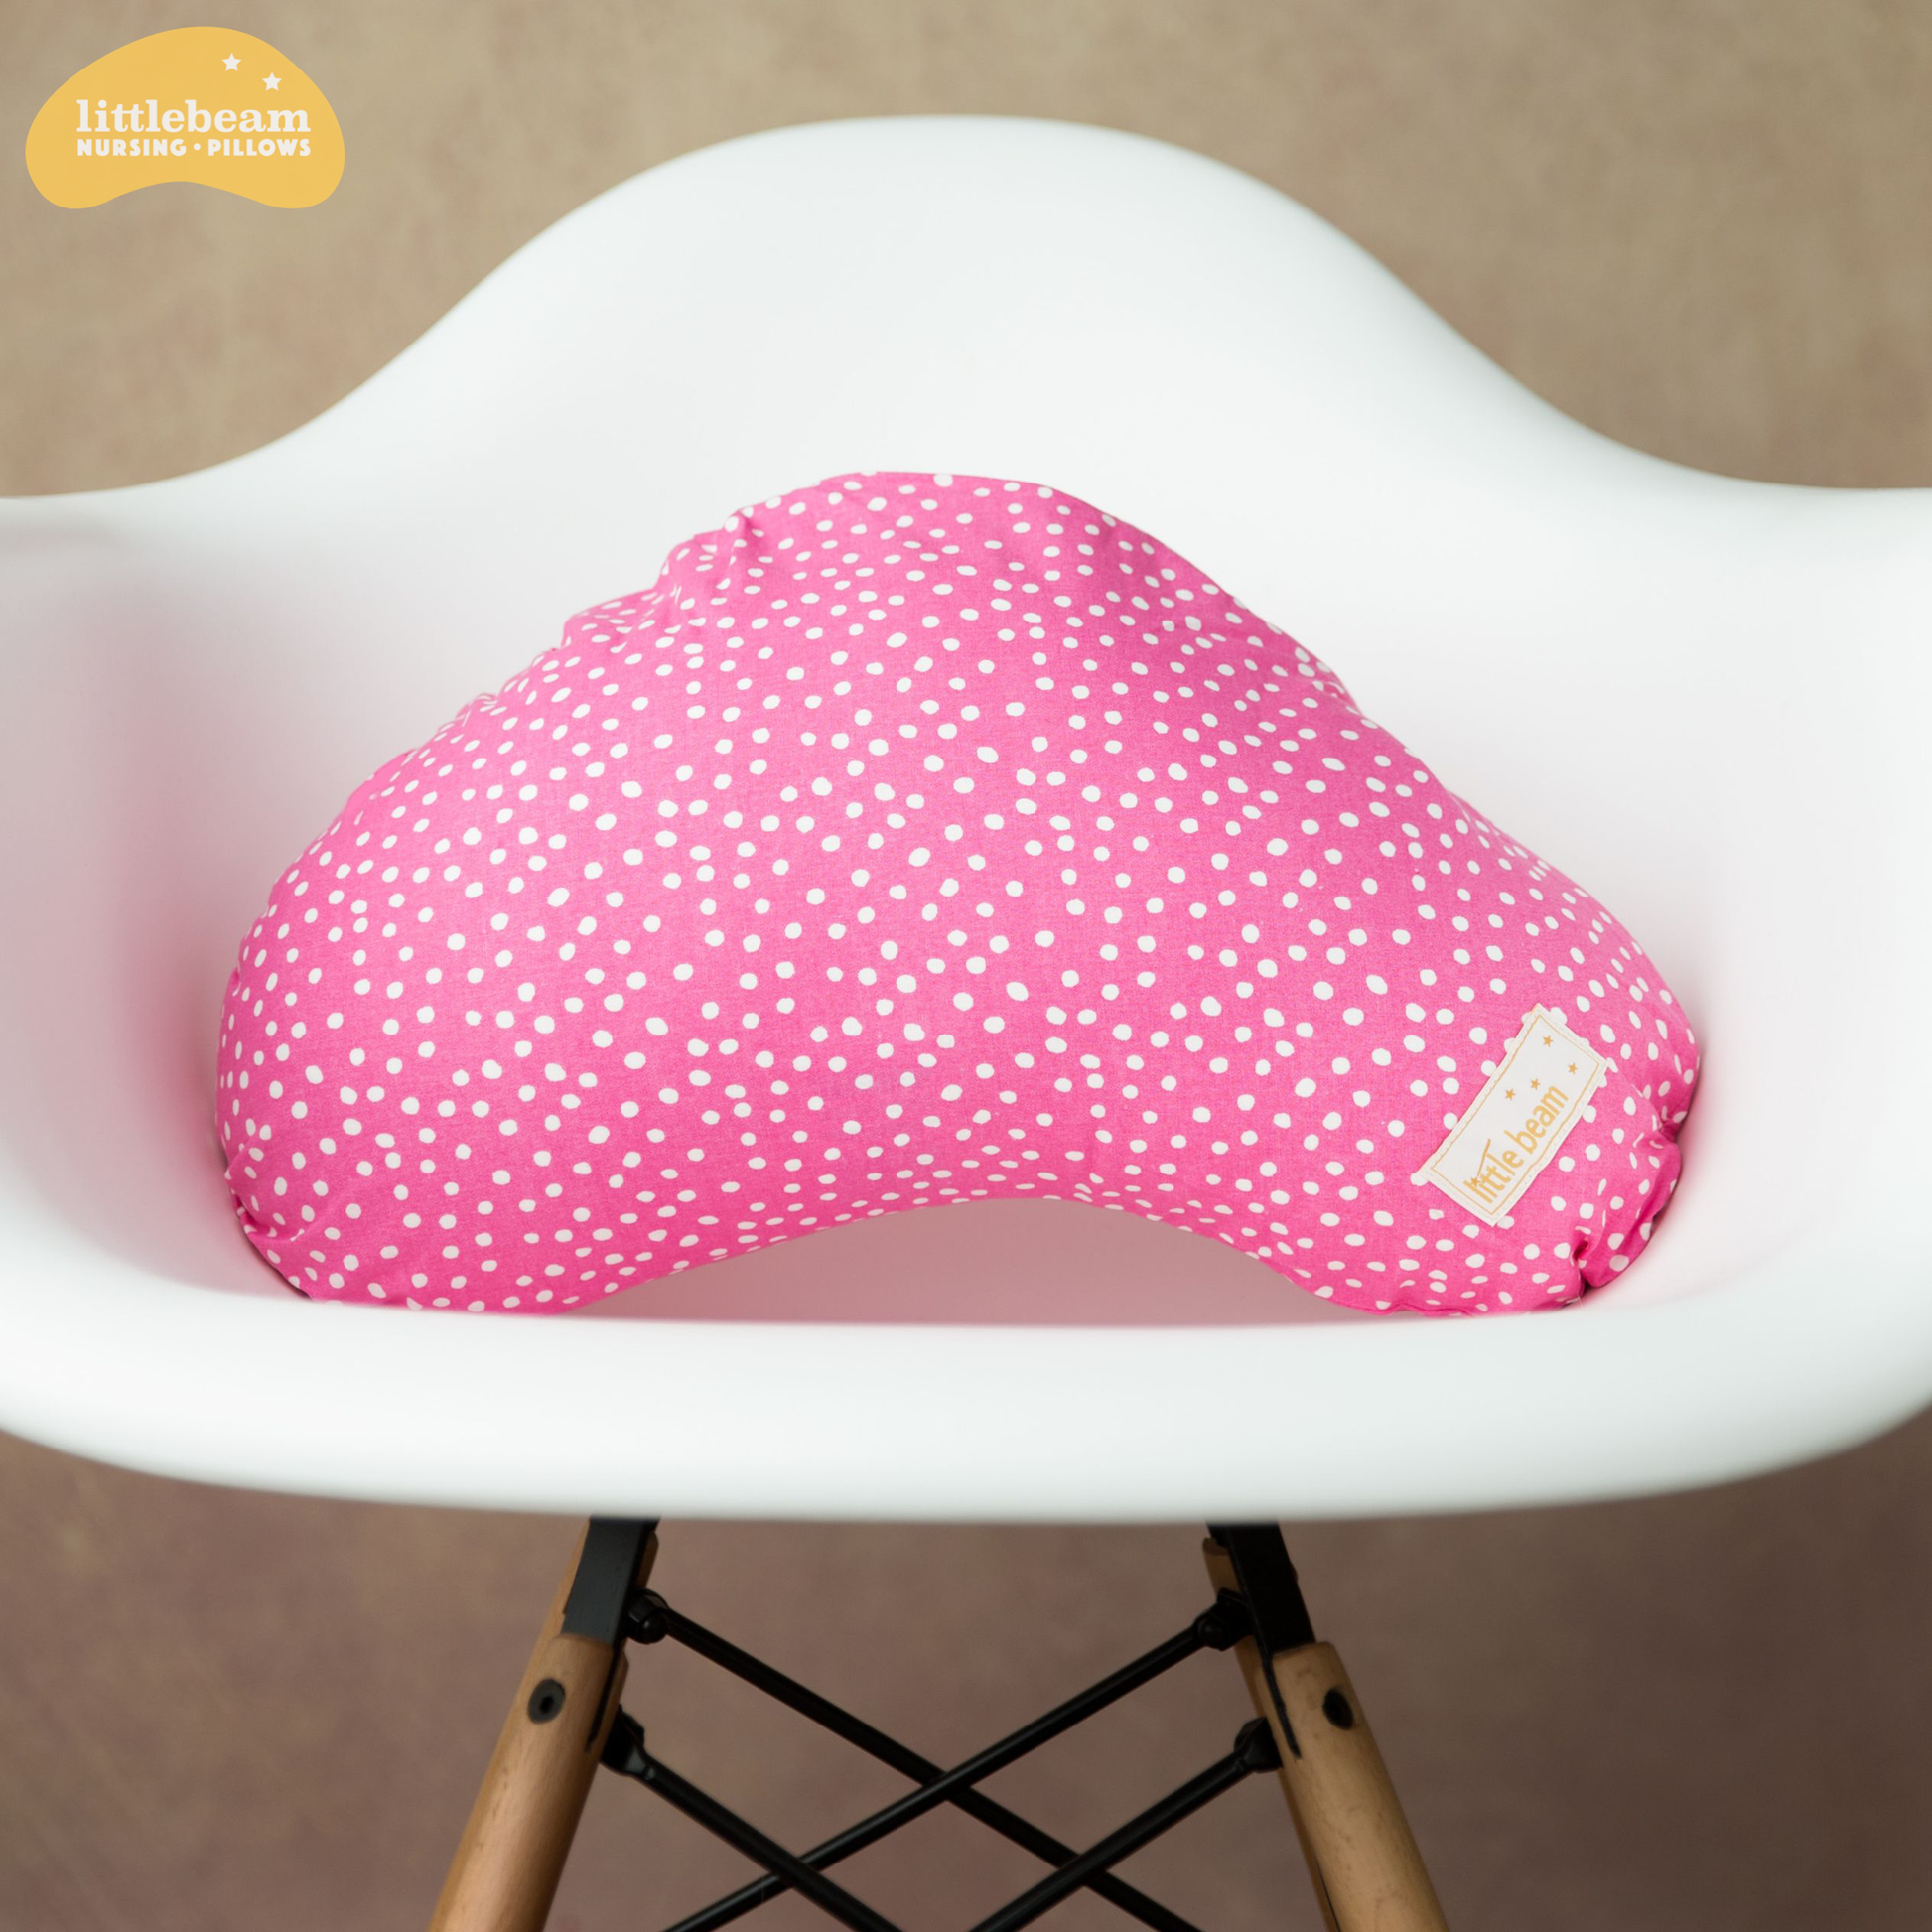 Little Me Infant Head Support Pillow Baby Support Car Seat Cushion Pink  Flowers